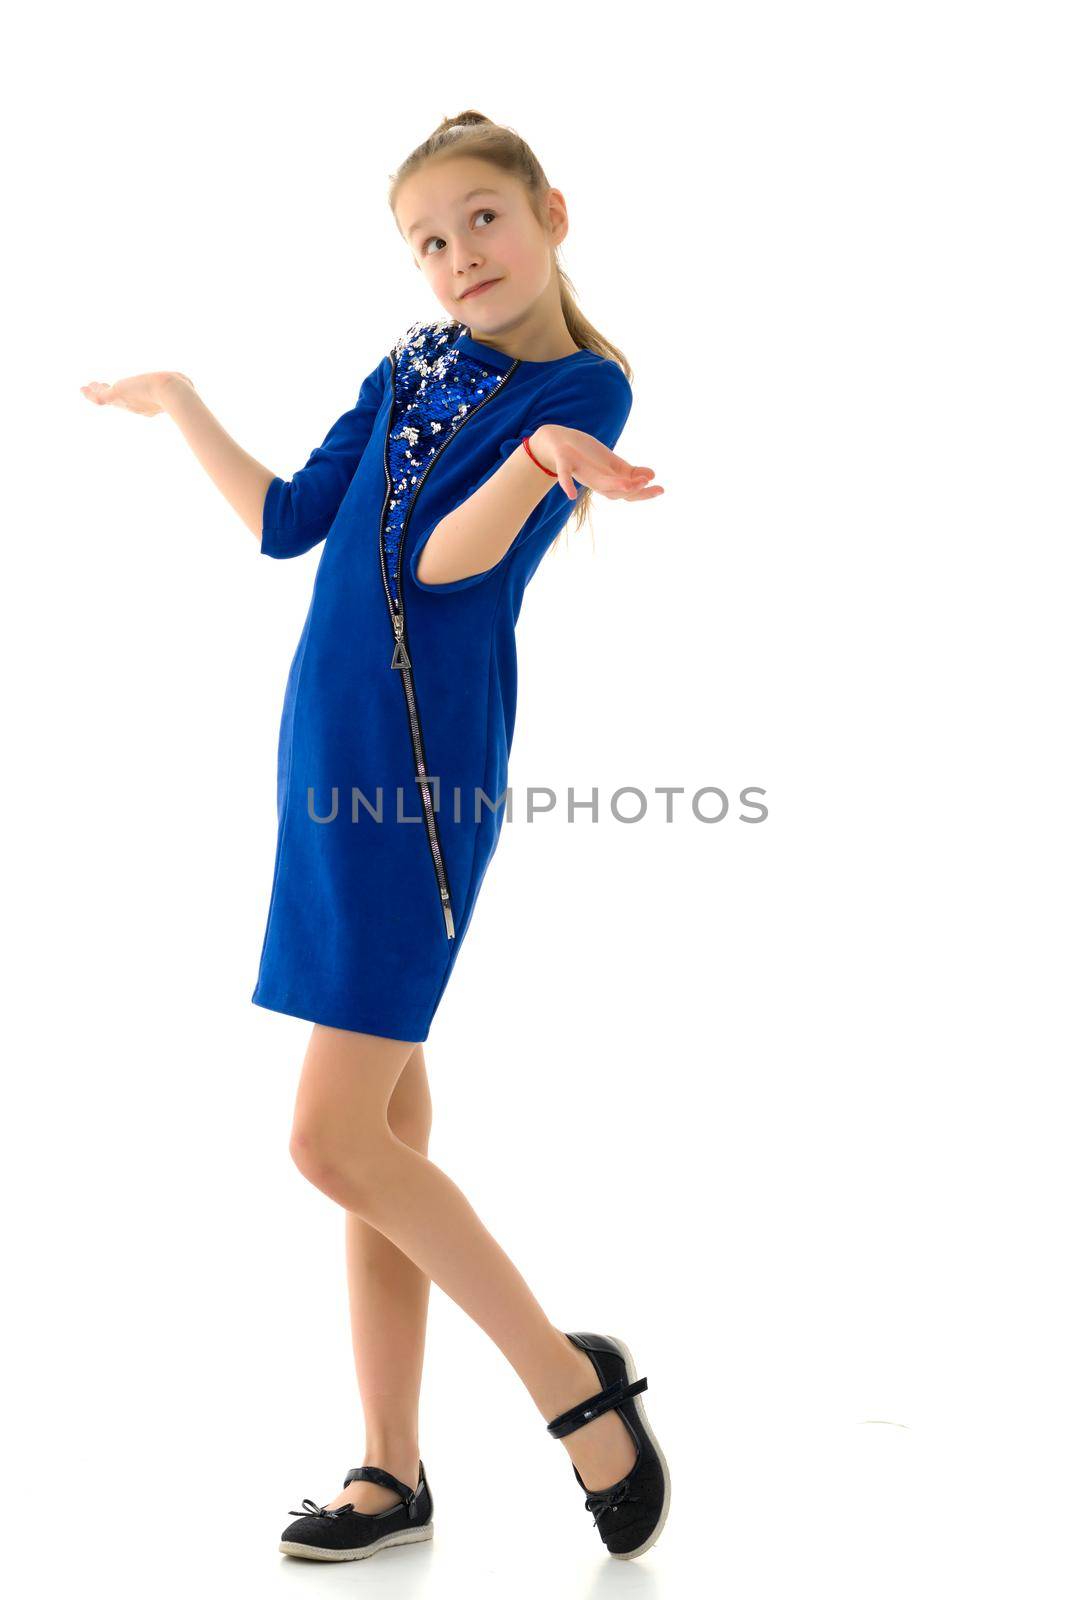 Beautiful Girl Spread her Hands and Shrugging Shoulders, I Do Not Know, Oops, Sorry, Cute Emotional Teenage Girl Wearing Dress and Black Shoes Showing Helpless Gesture, Isolated on White Background.